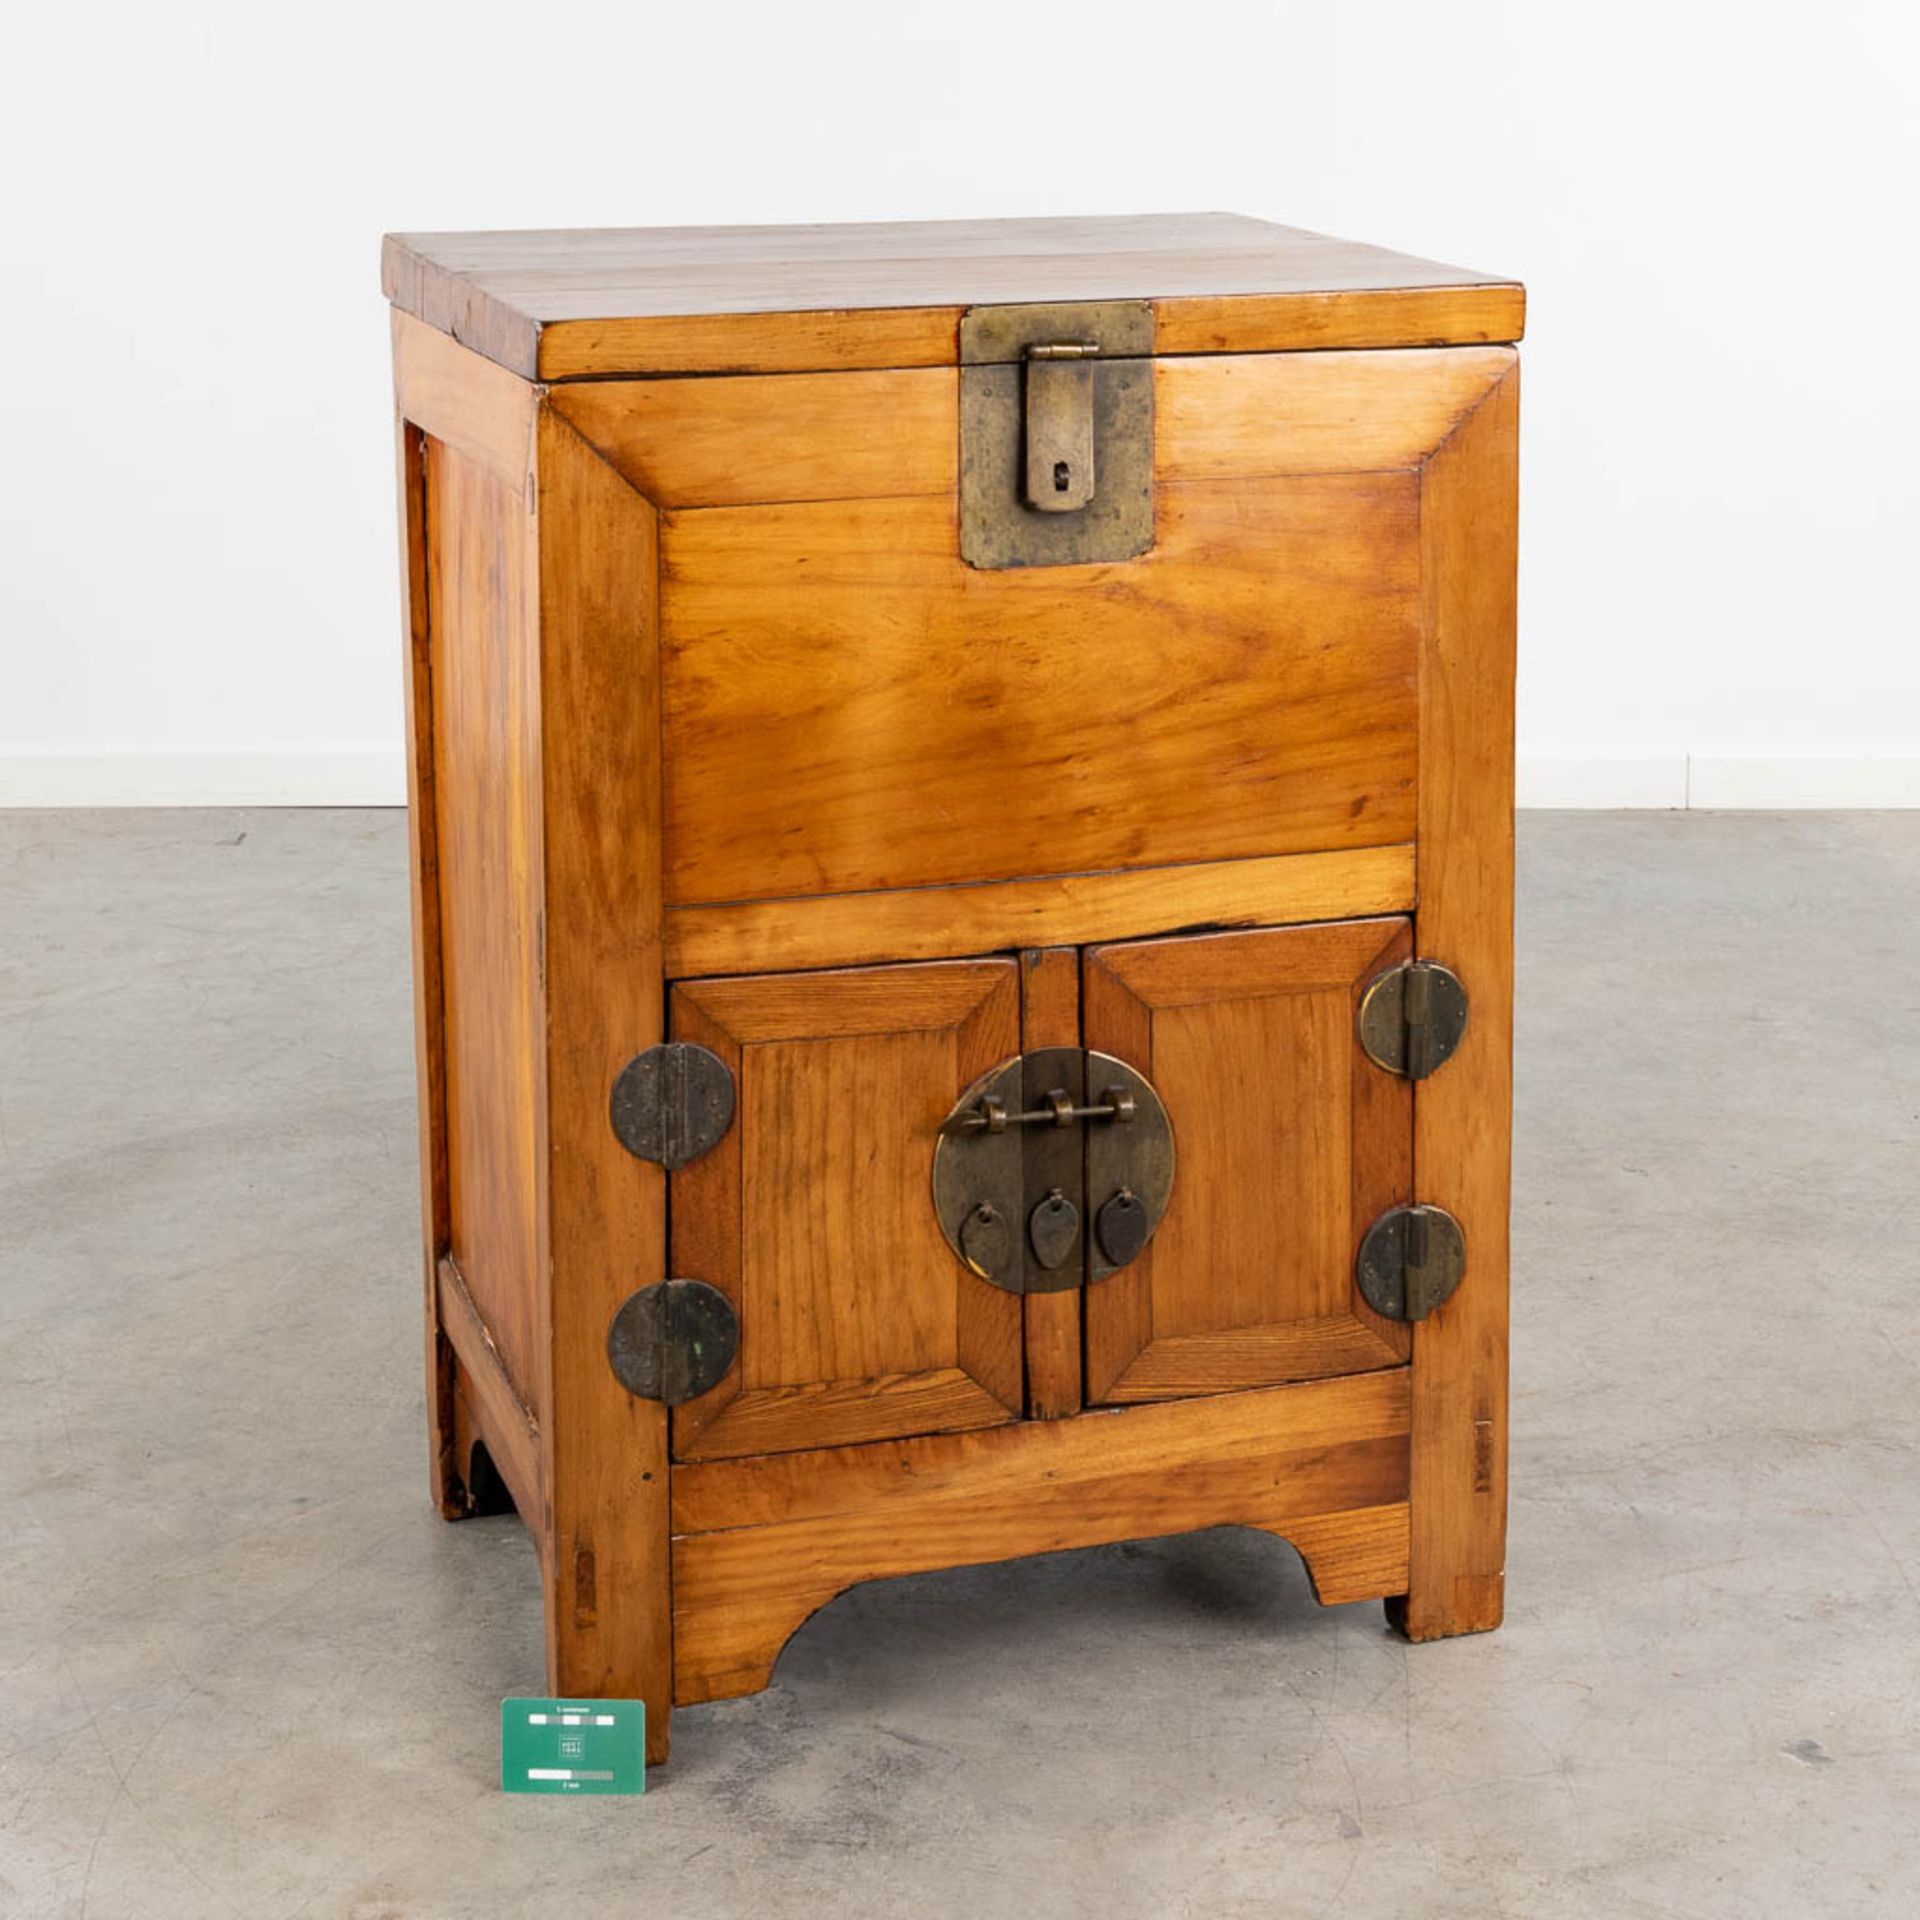 A small Chinese cabinet, hardwood with brass hardware. (L:47 x W:62 x H:88 cm) - Image 2 of 16